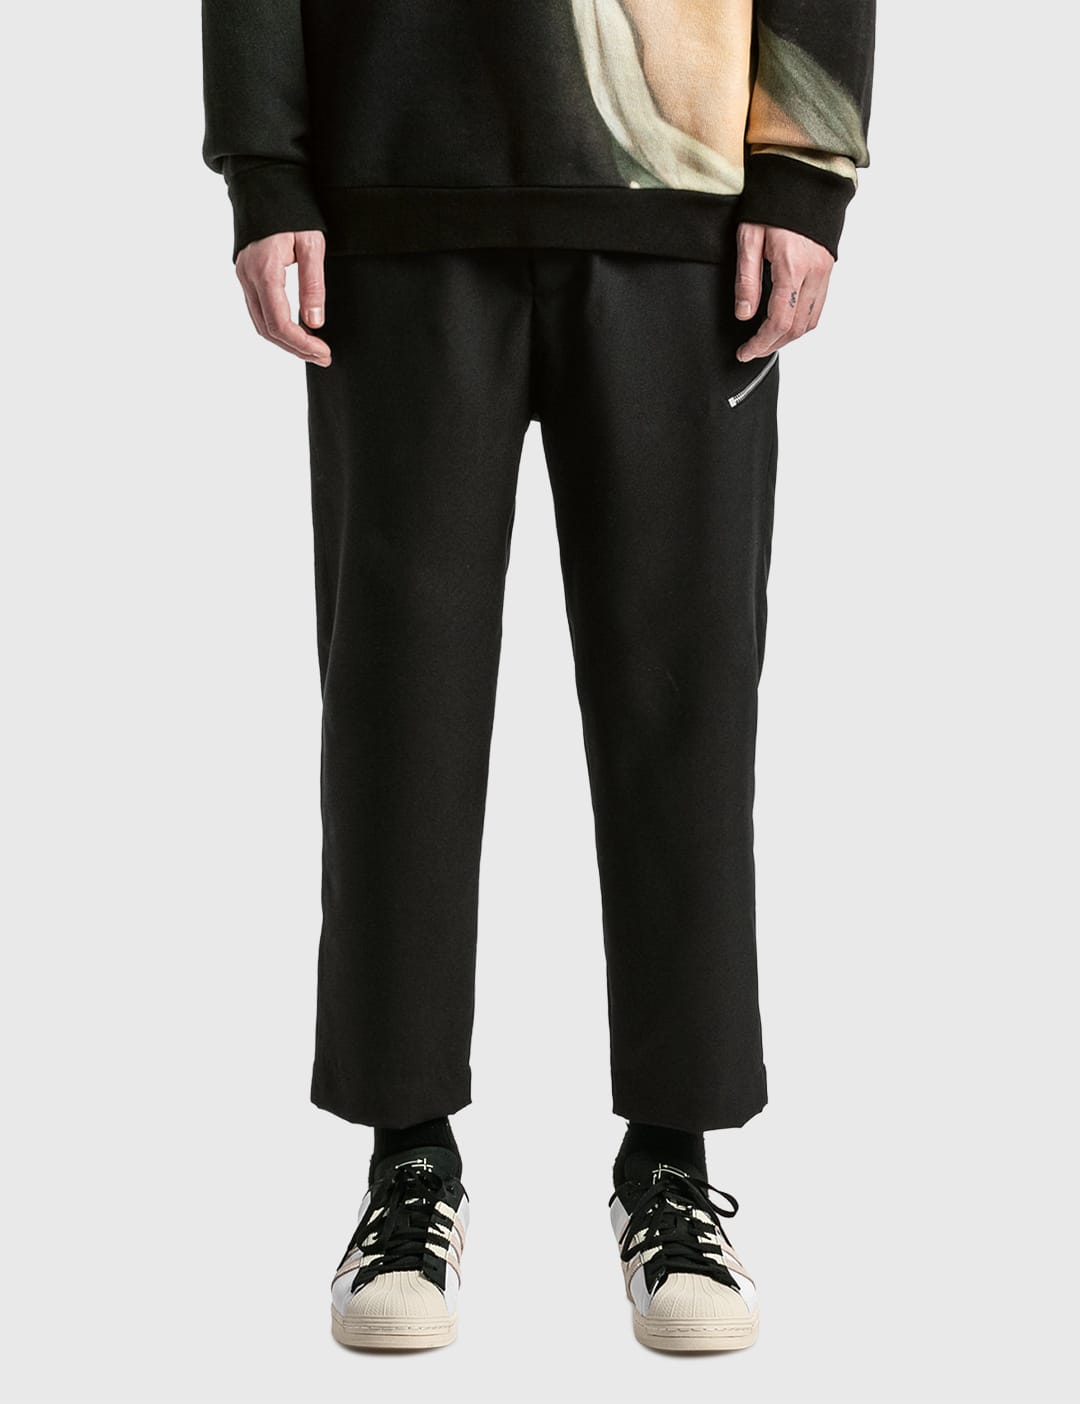 OAMC - REGS TROUSERS | HBX - Globally Curated Fashion and